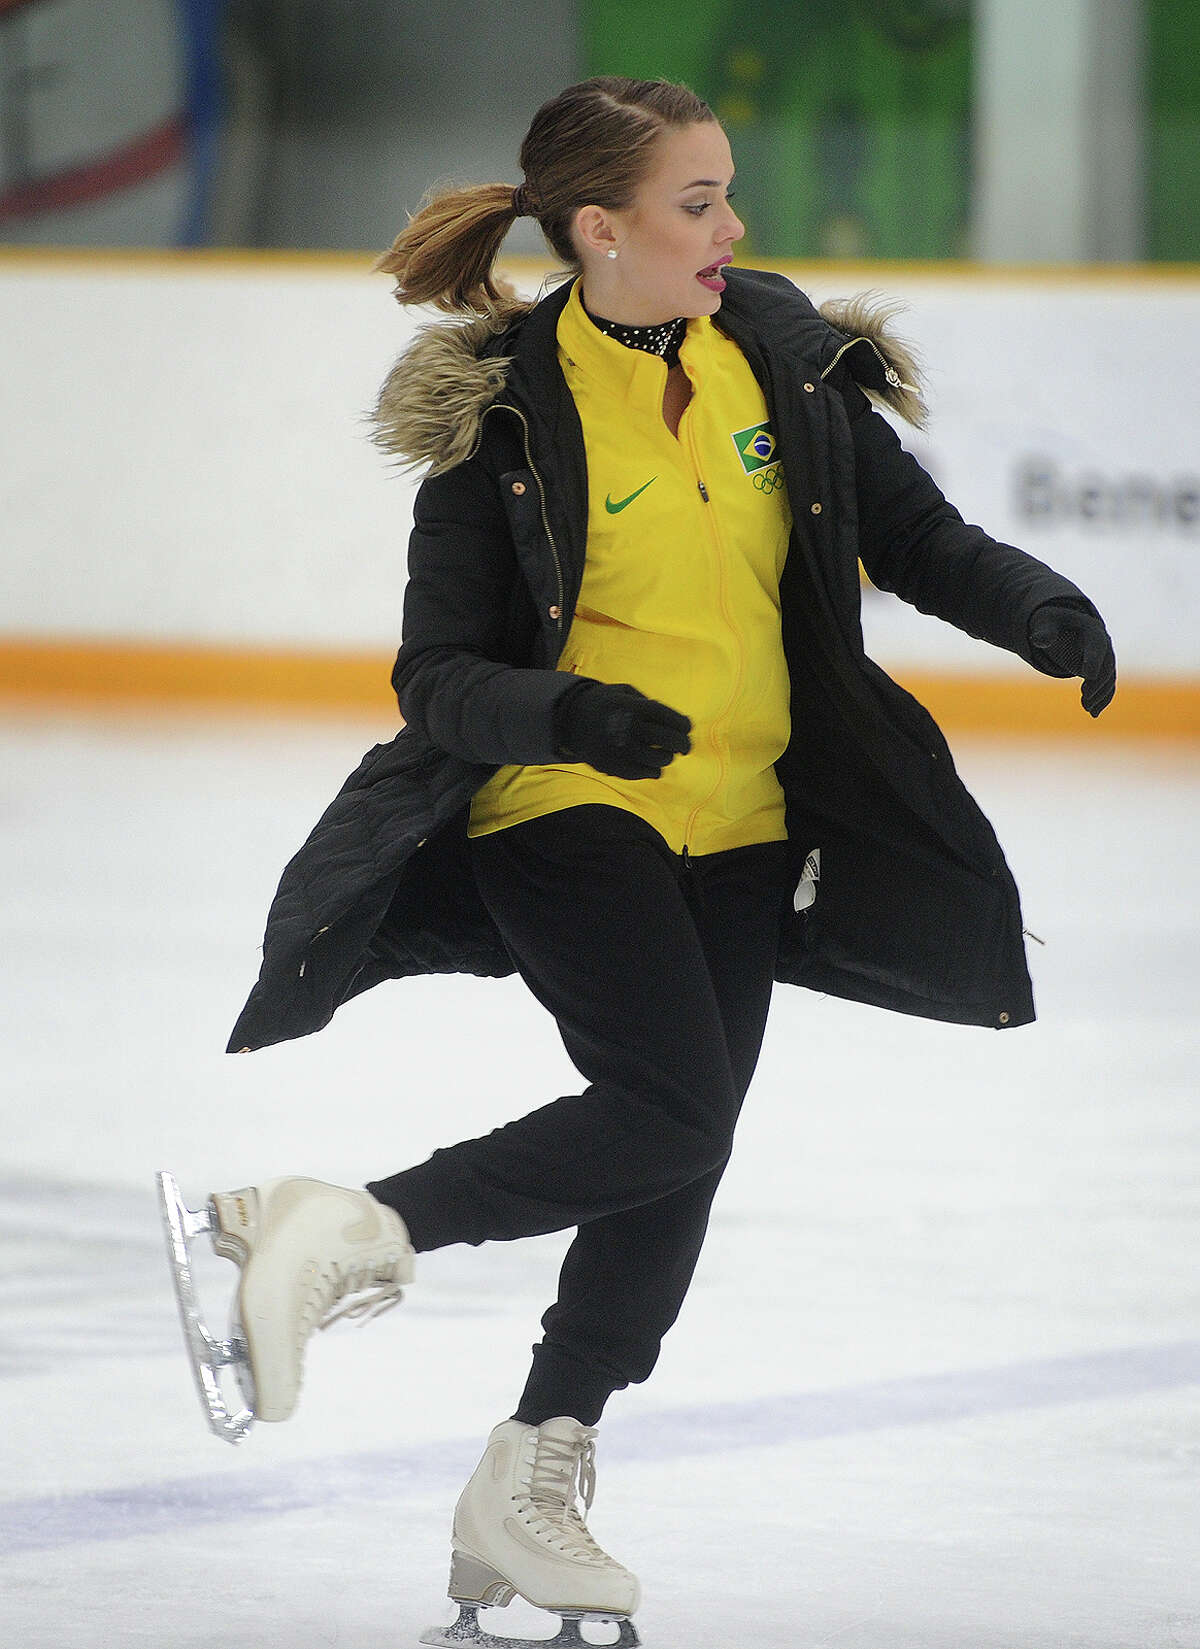 Olympic figure skater Isadora Williams demonstrates technique during a skating clinic for kids following her performance in the 2018 Olympic Dreams Skating Show at the Danbury Ice Arena in Danbury, Conn. on Sunday, January 28, 2018.